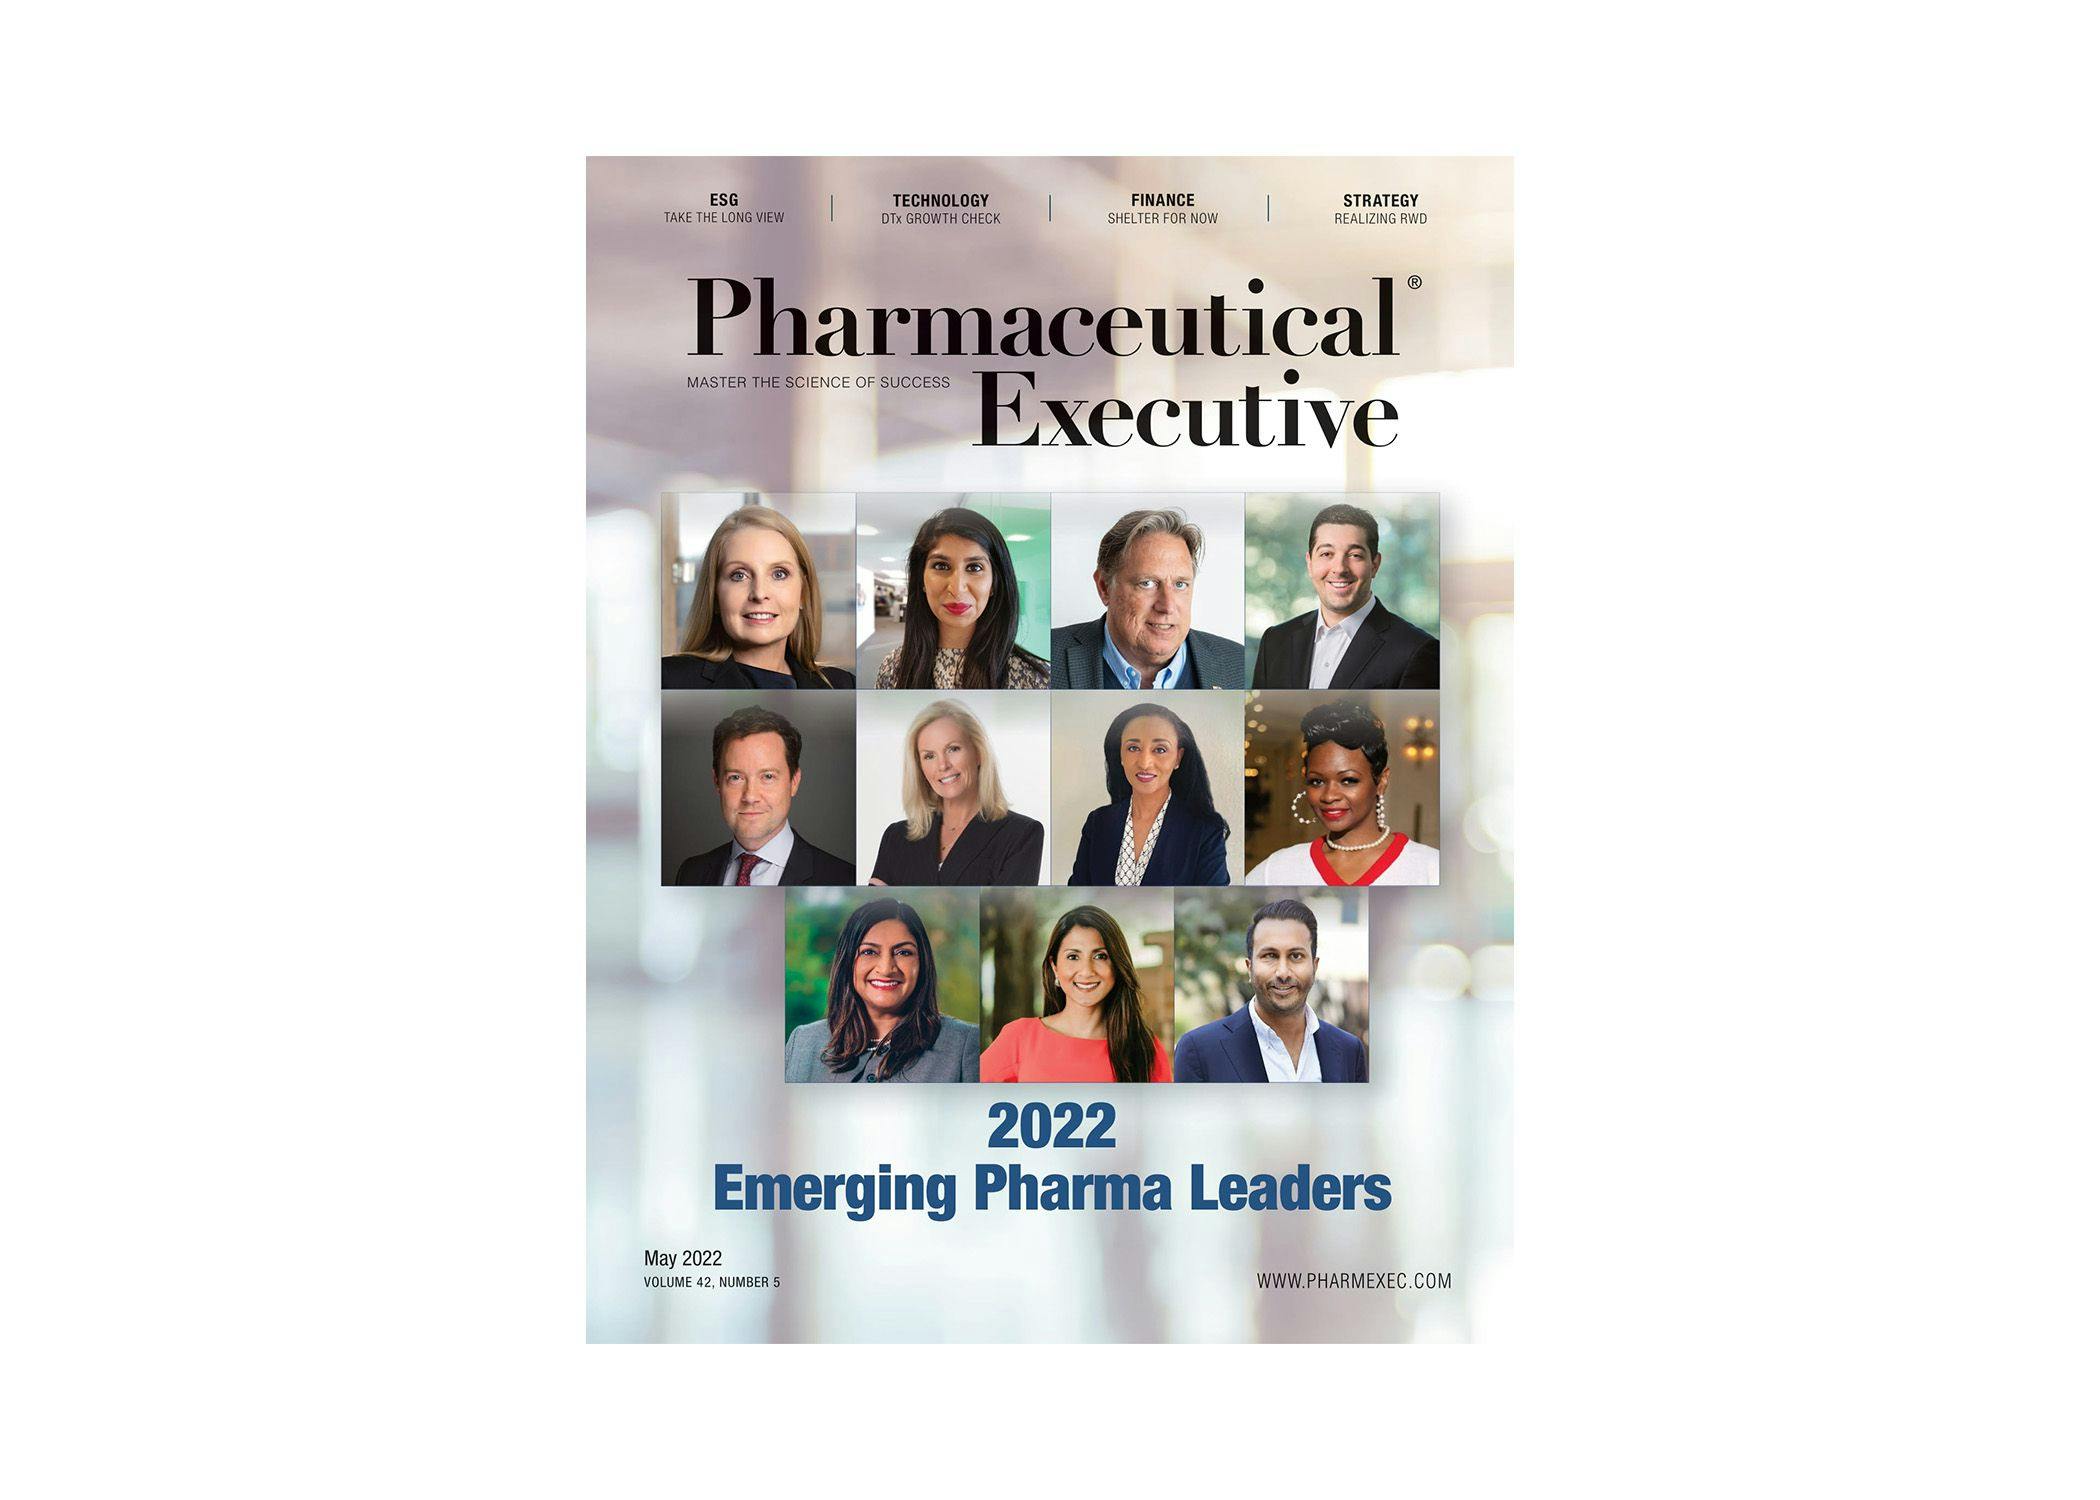 Pharmaceutical Executive, May 2022 Issue (PDF)